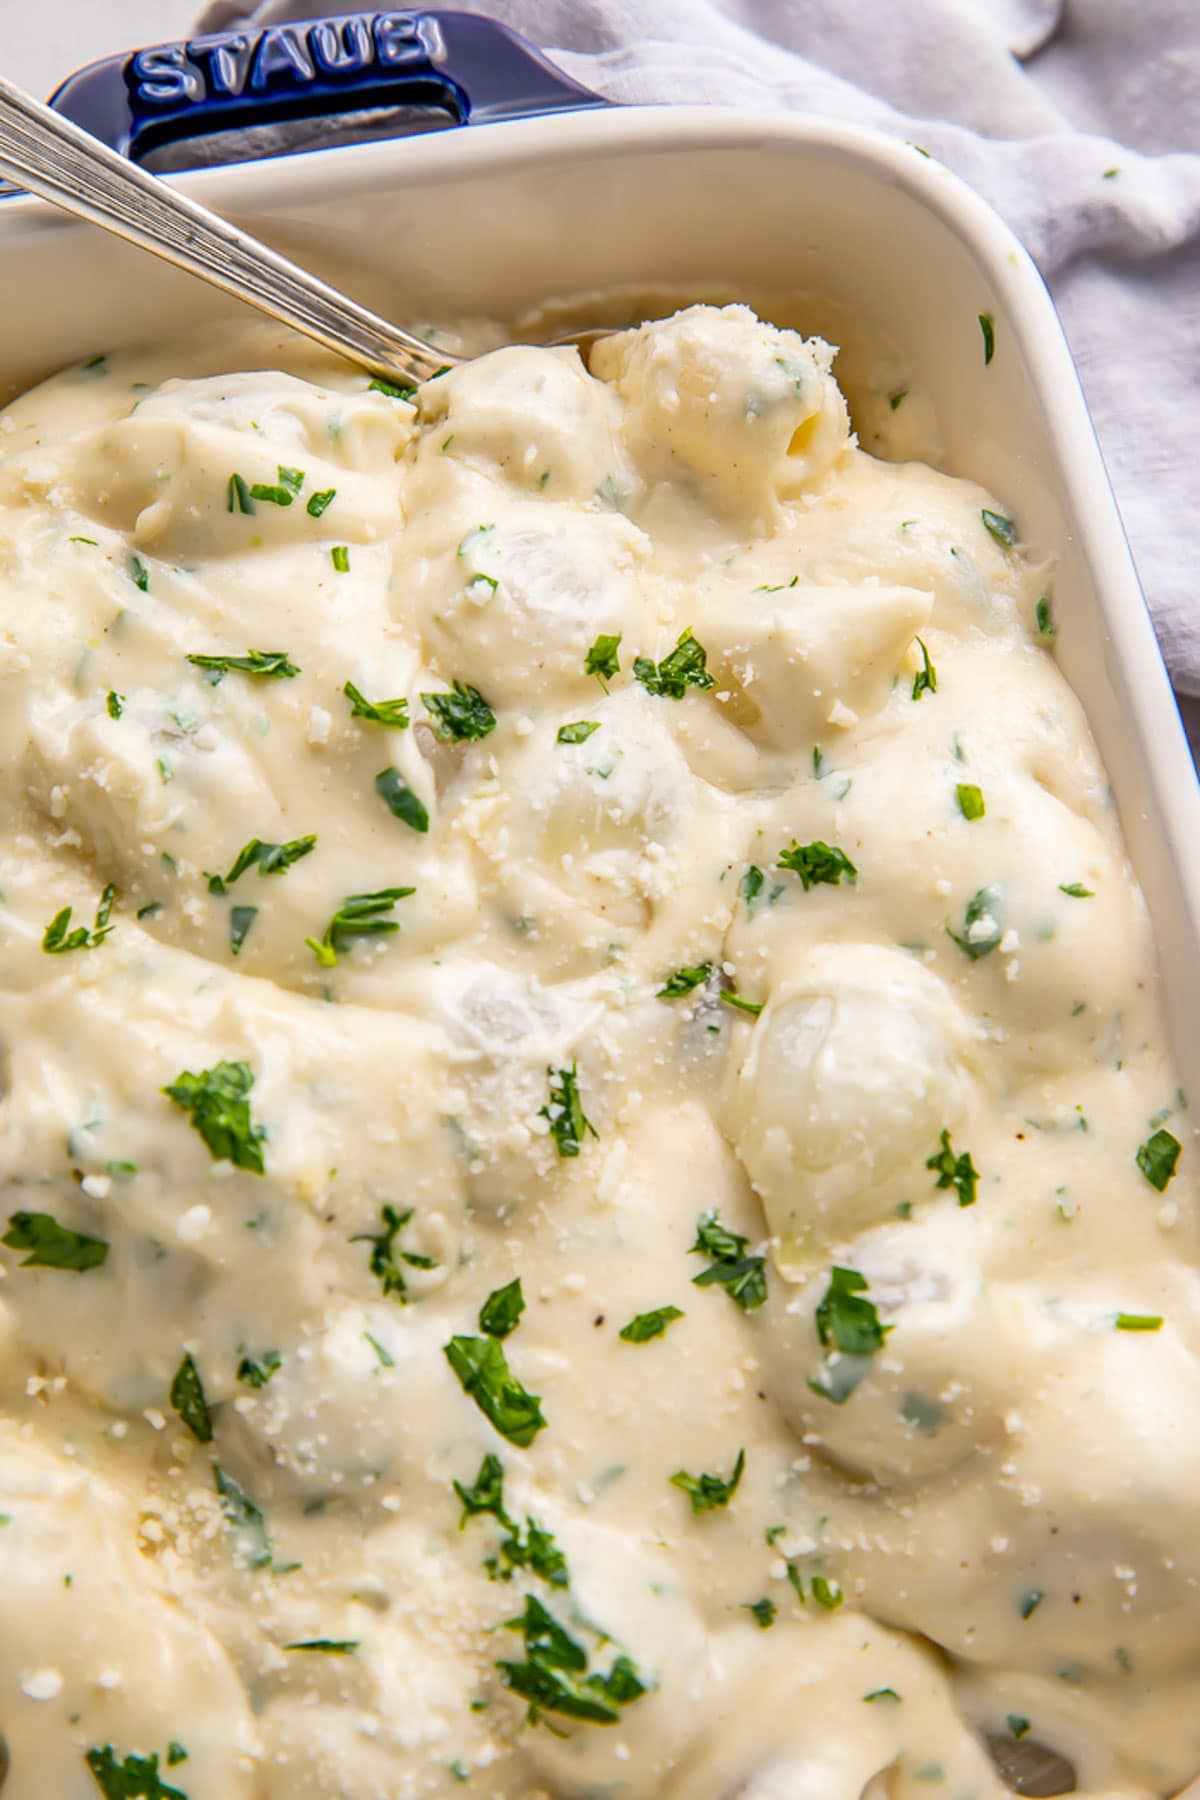 Creamed onions garnished with fresh herbs in a casserole dish.